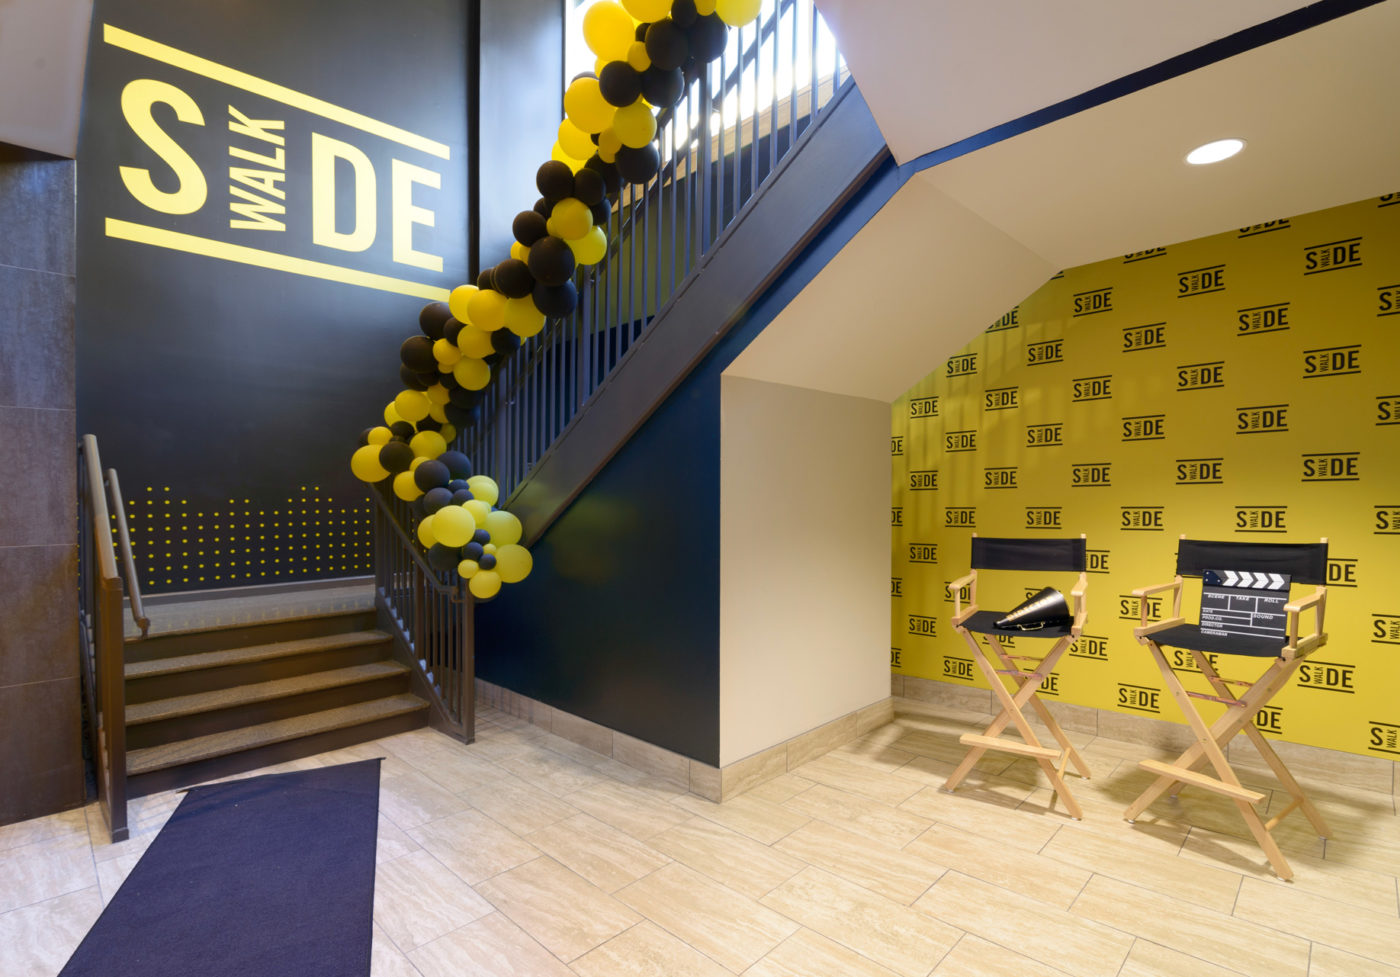 Entry area with step and repeat photo wall and branded wall graphics at Sidewalk Cinema